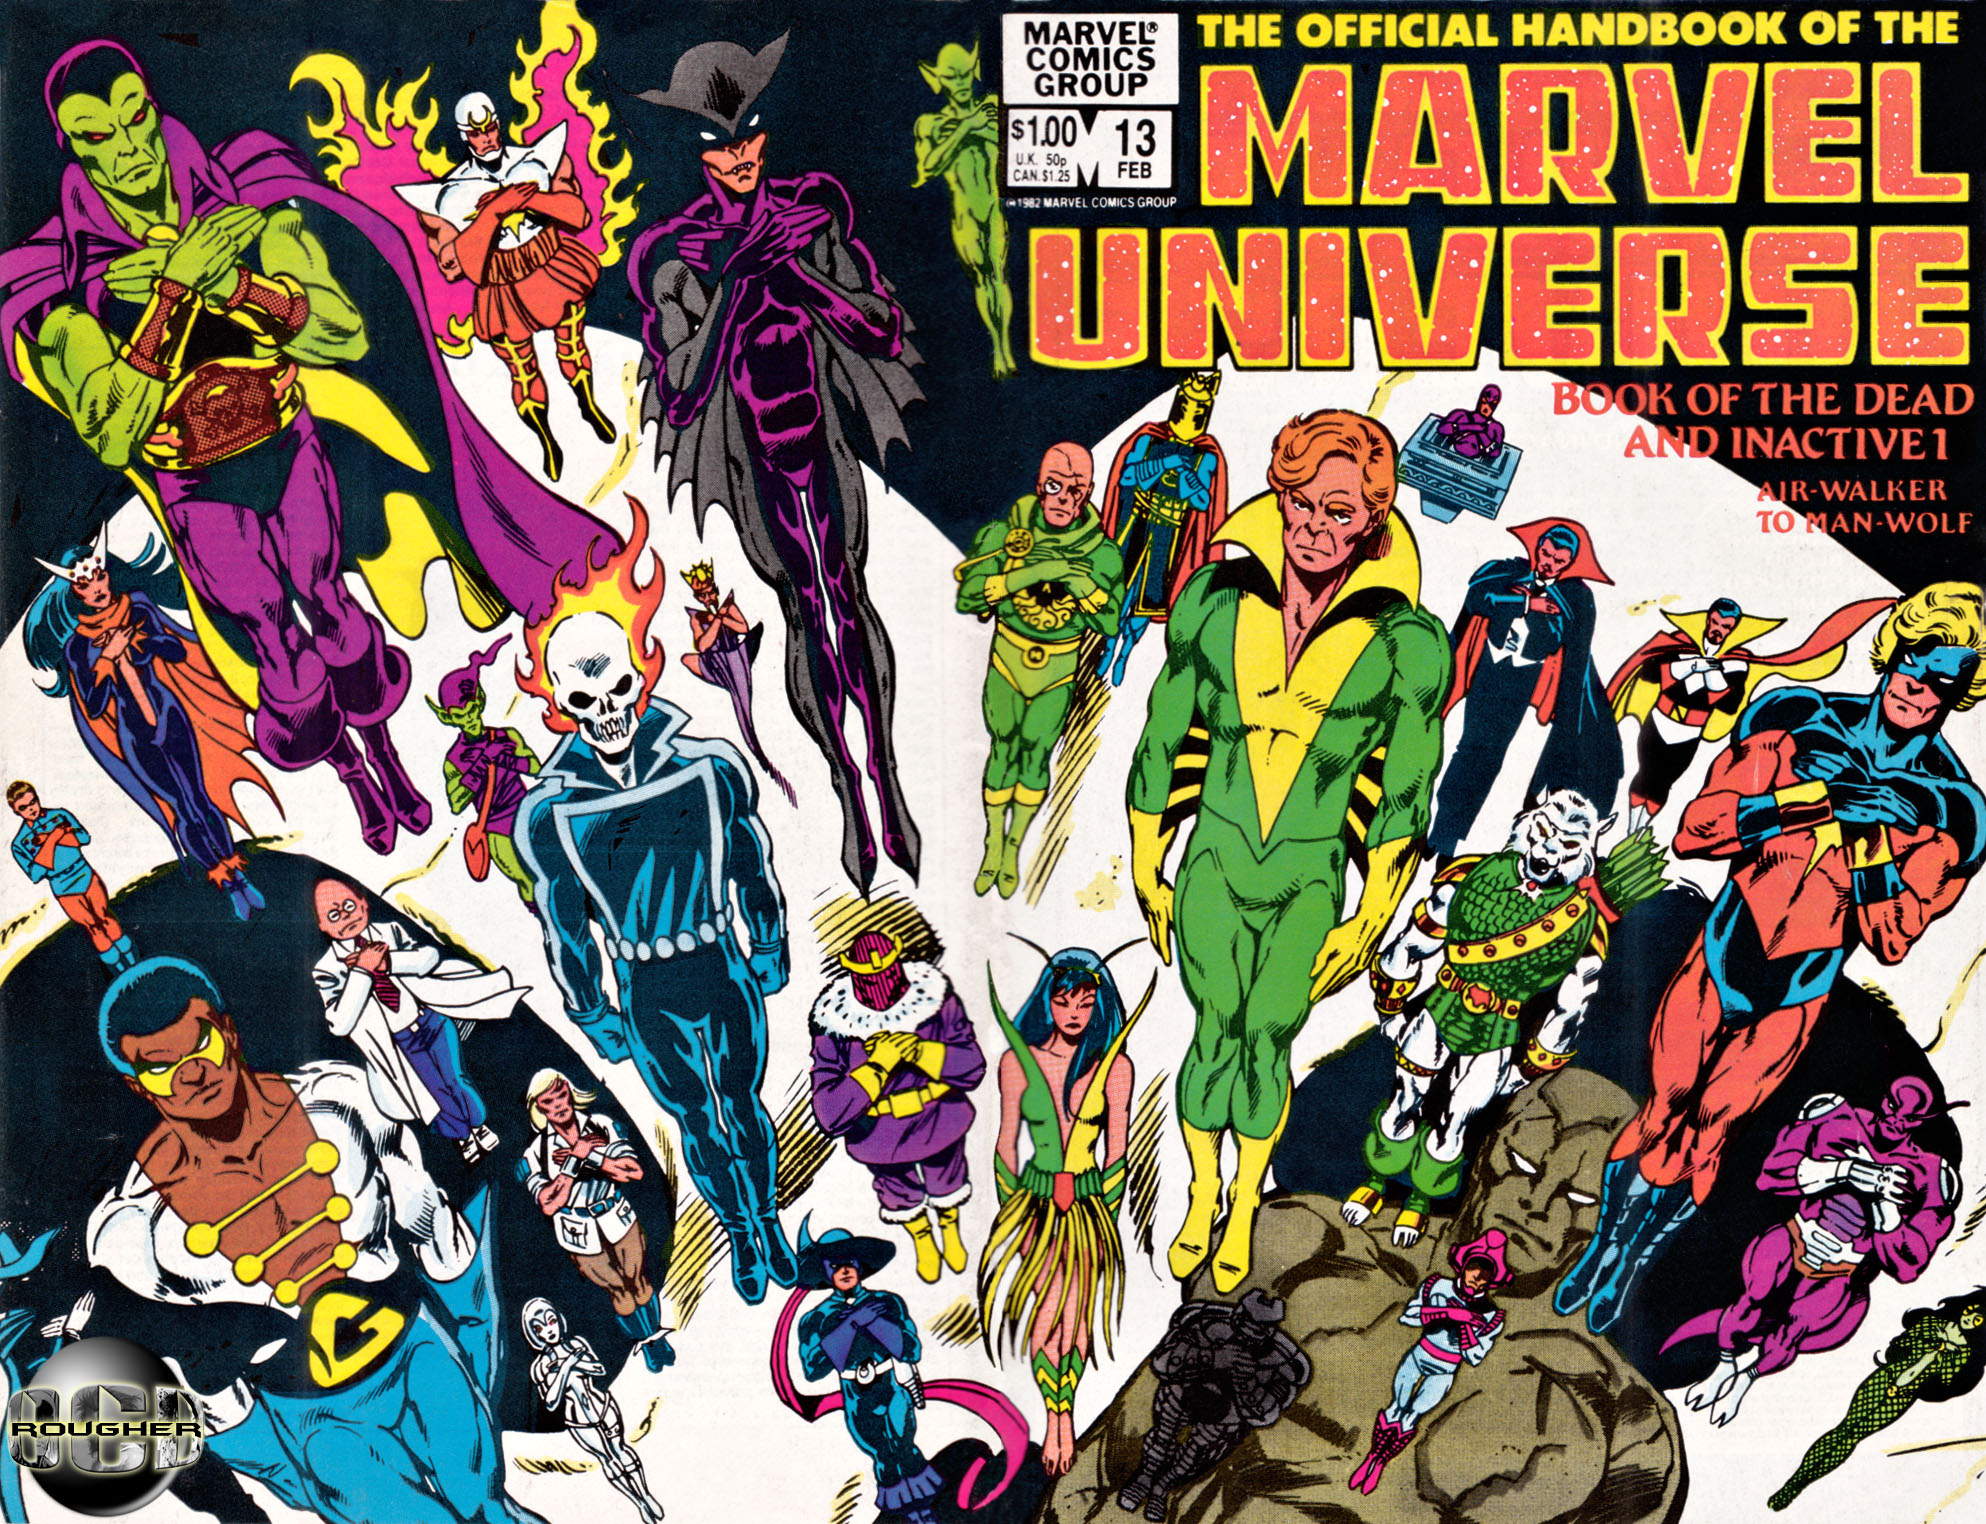 Read online The Official Handbook of the Marvel Universe comic -  Issue #13 - 1